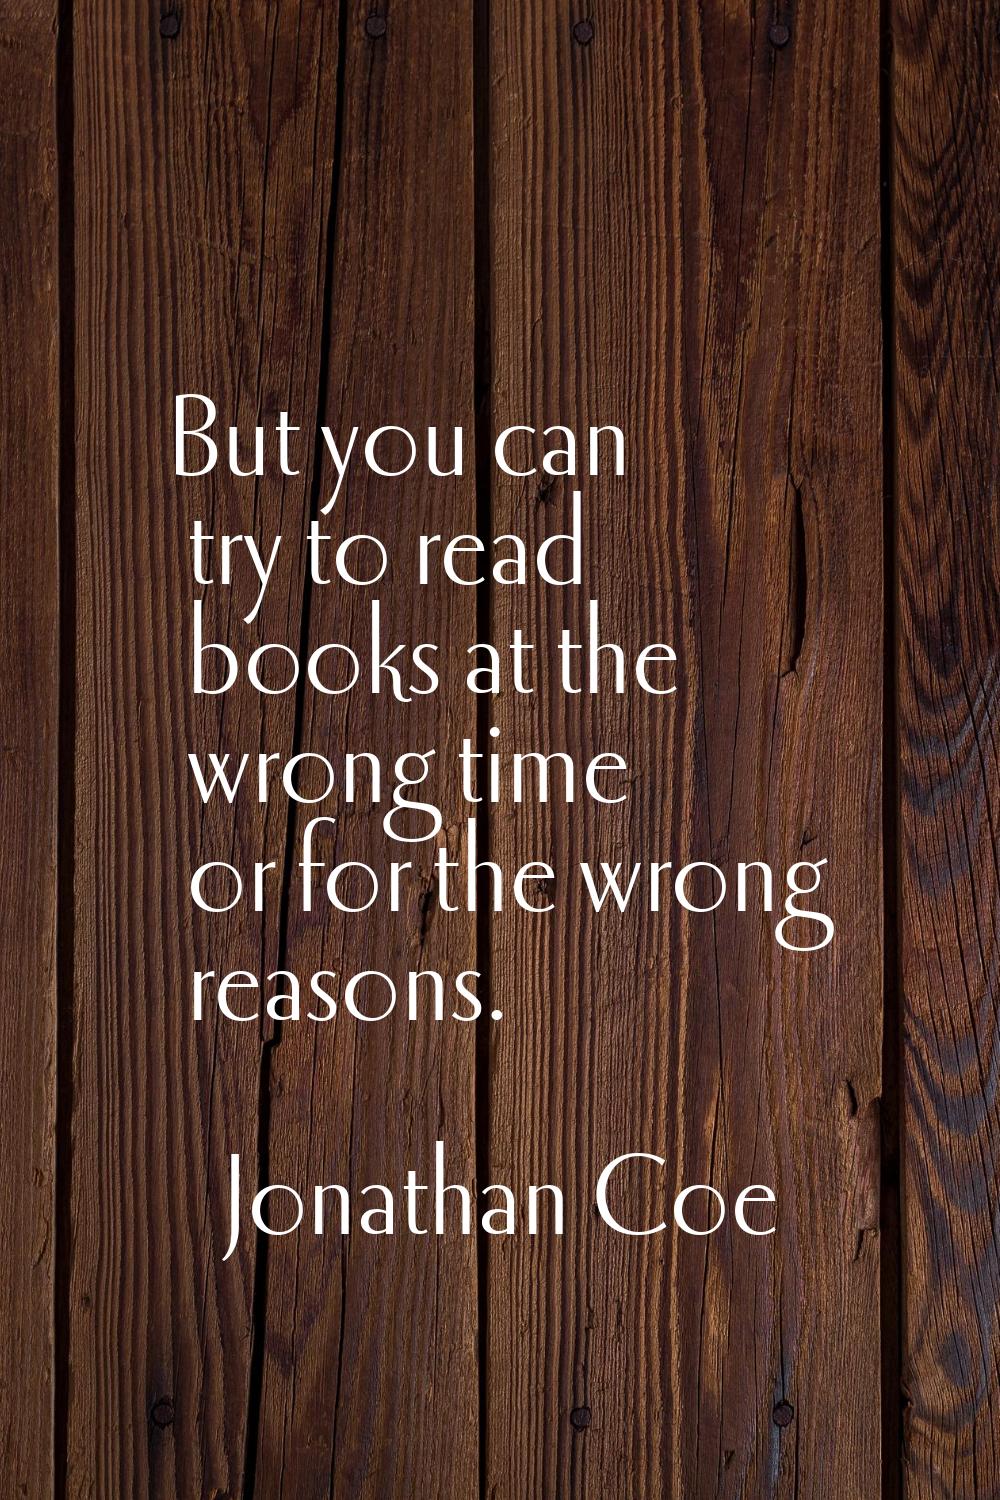 But you can try to read books at the wrong time or for the wrong reasons.